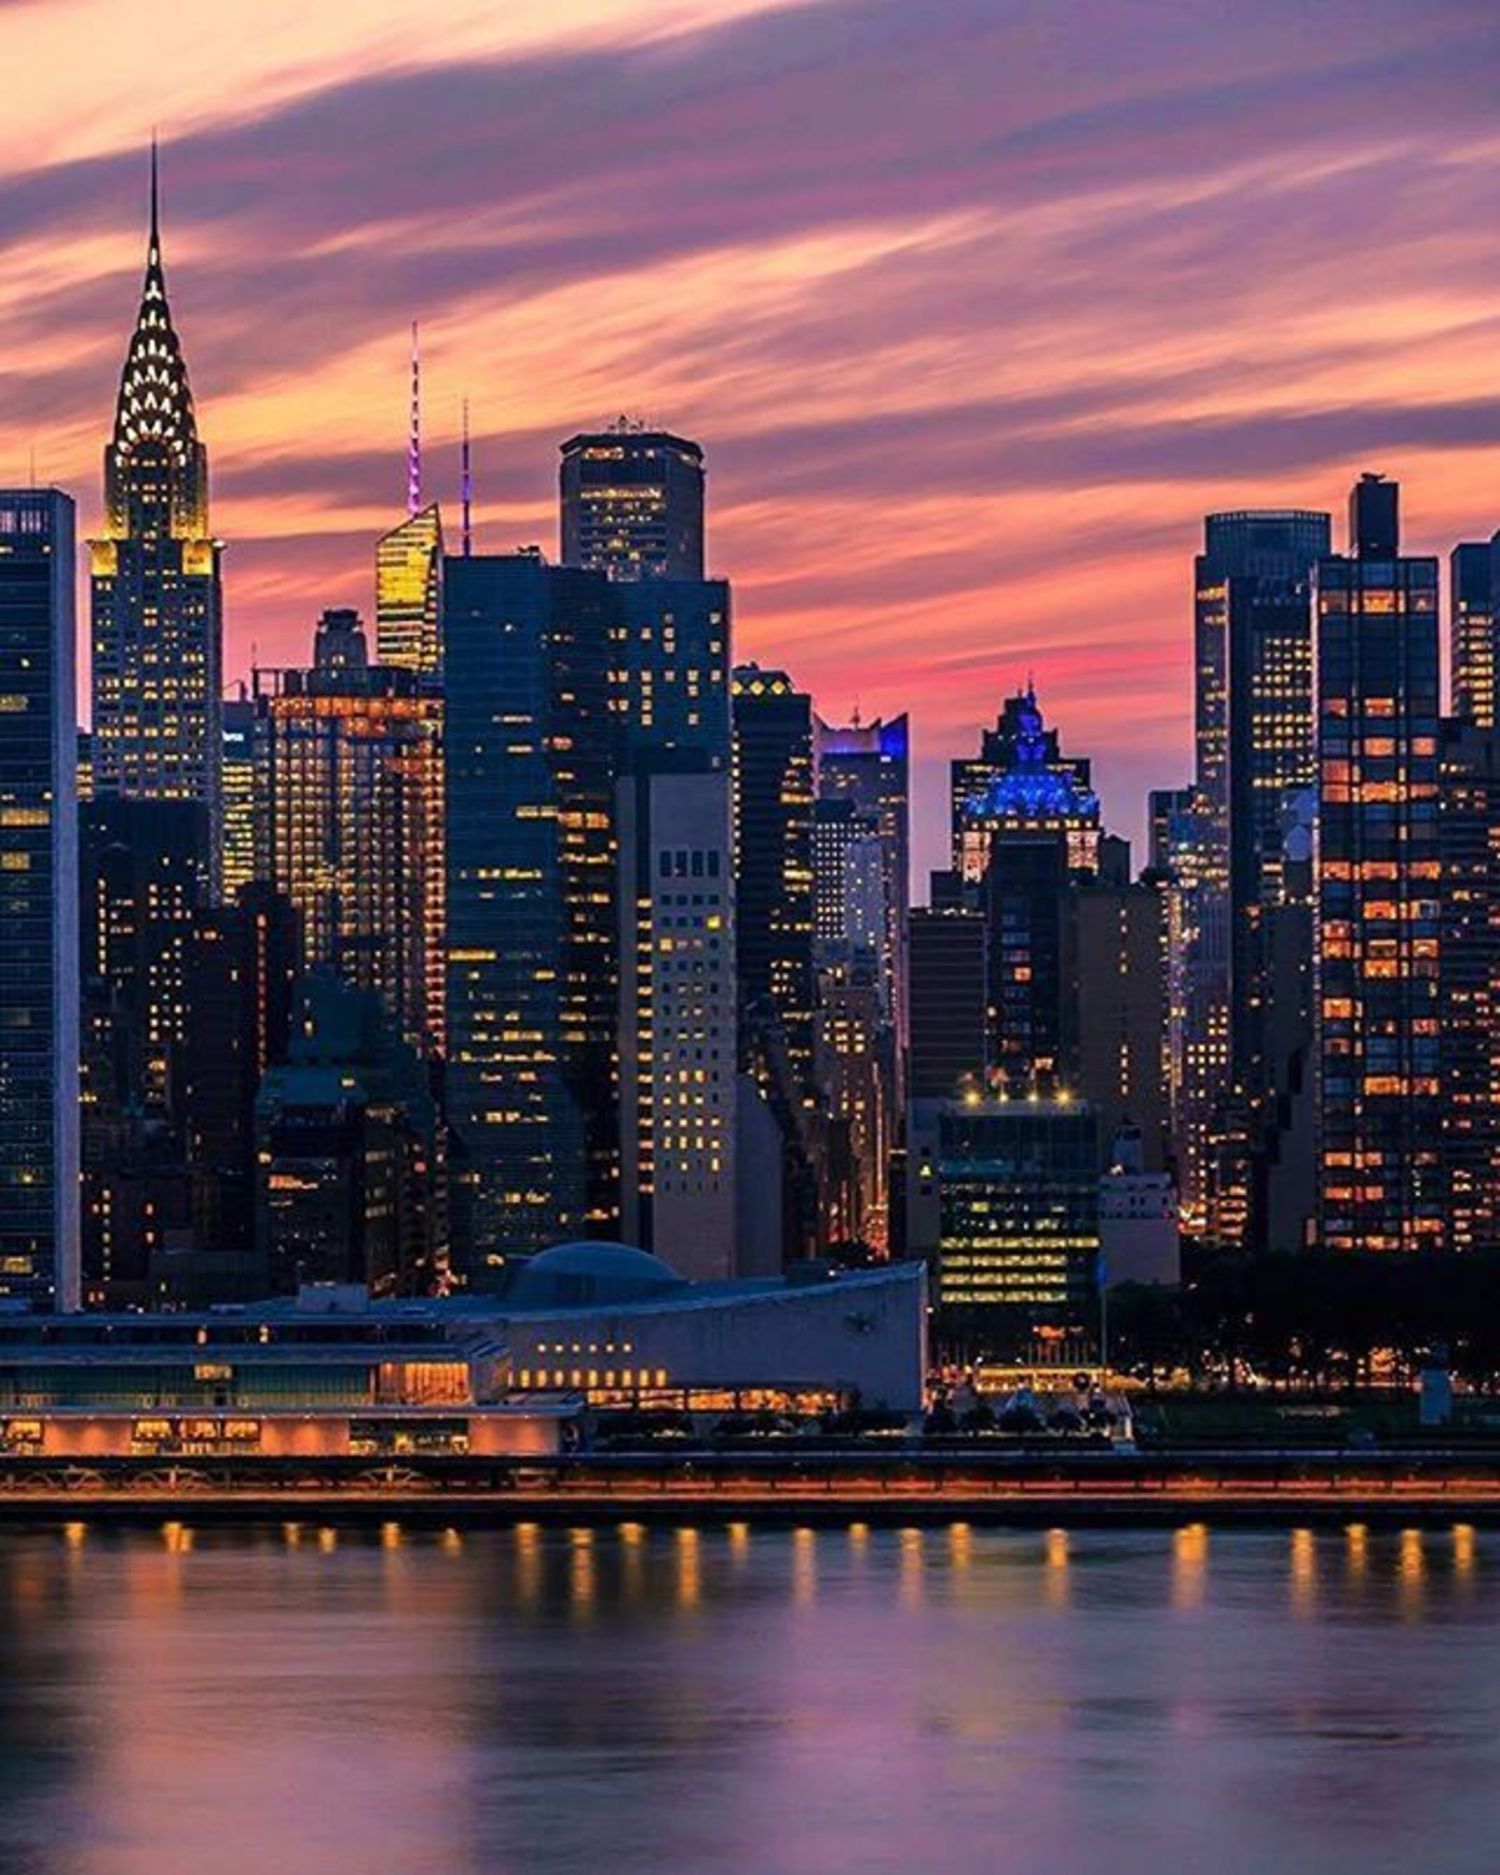 A beautiful sunset in New York City with the lights of the buildings reflecting in the water. - City, cityscape, New York